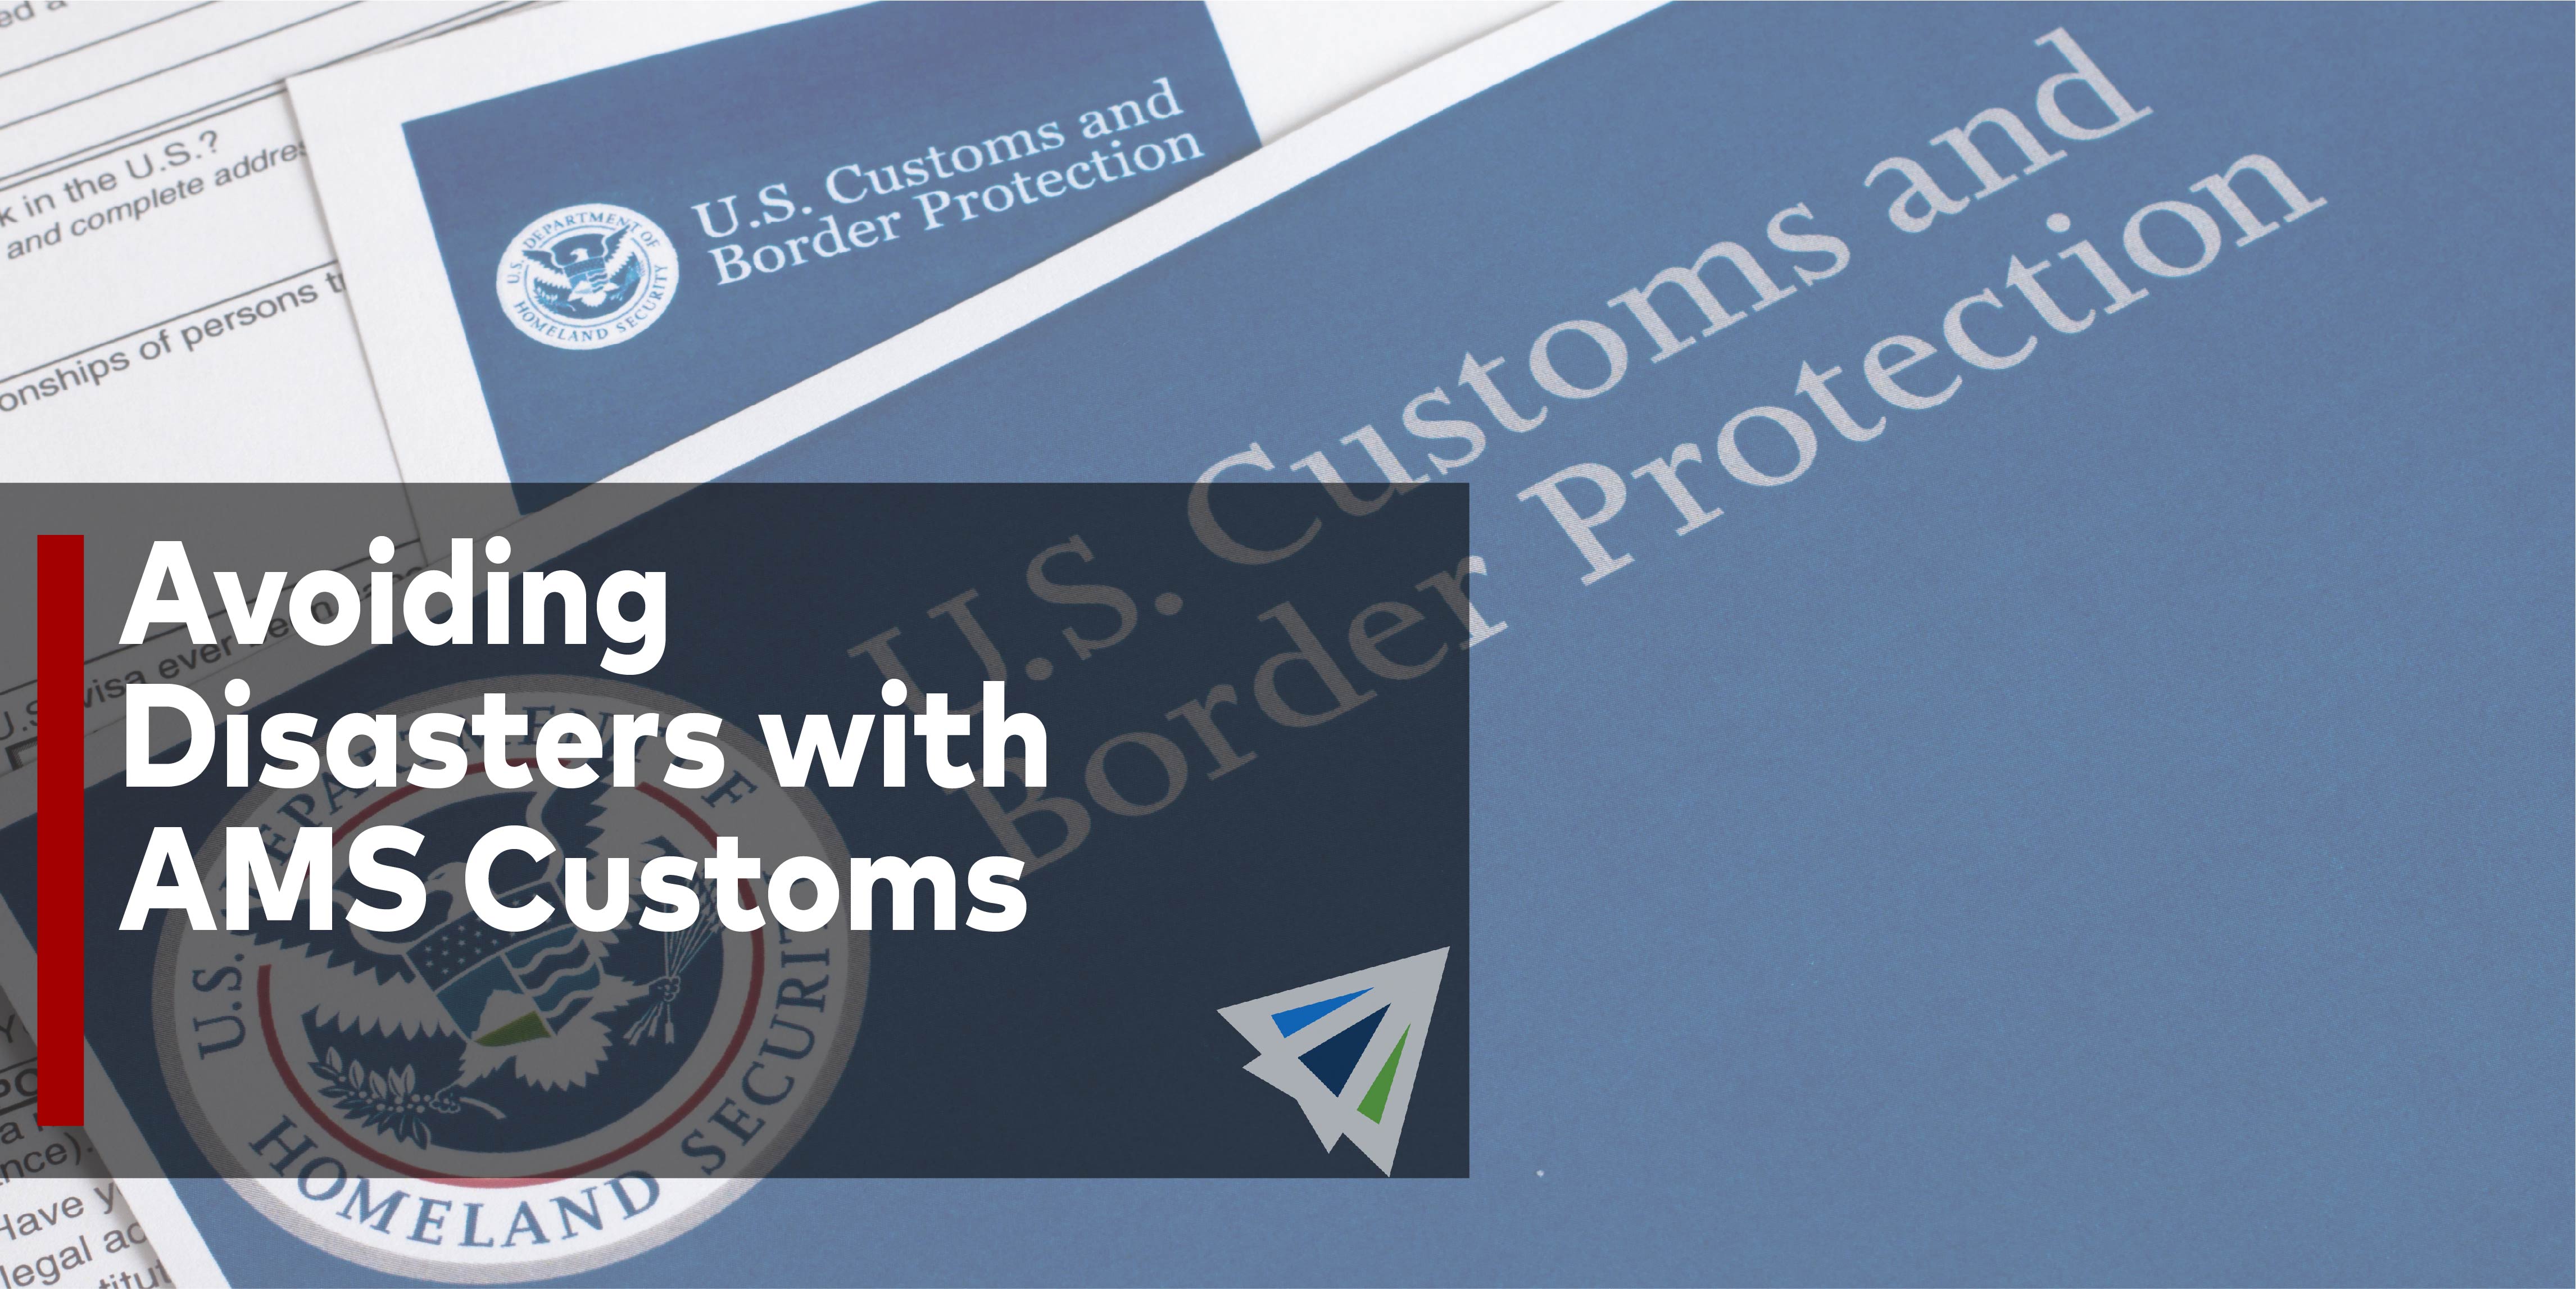 Avoiding Disasters with AMS Customs